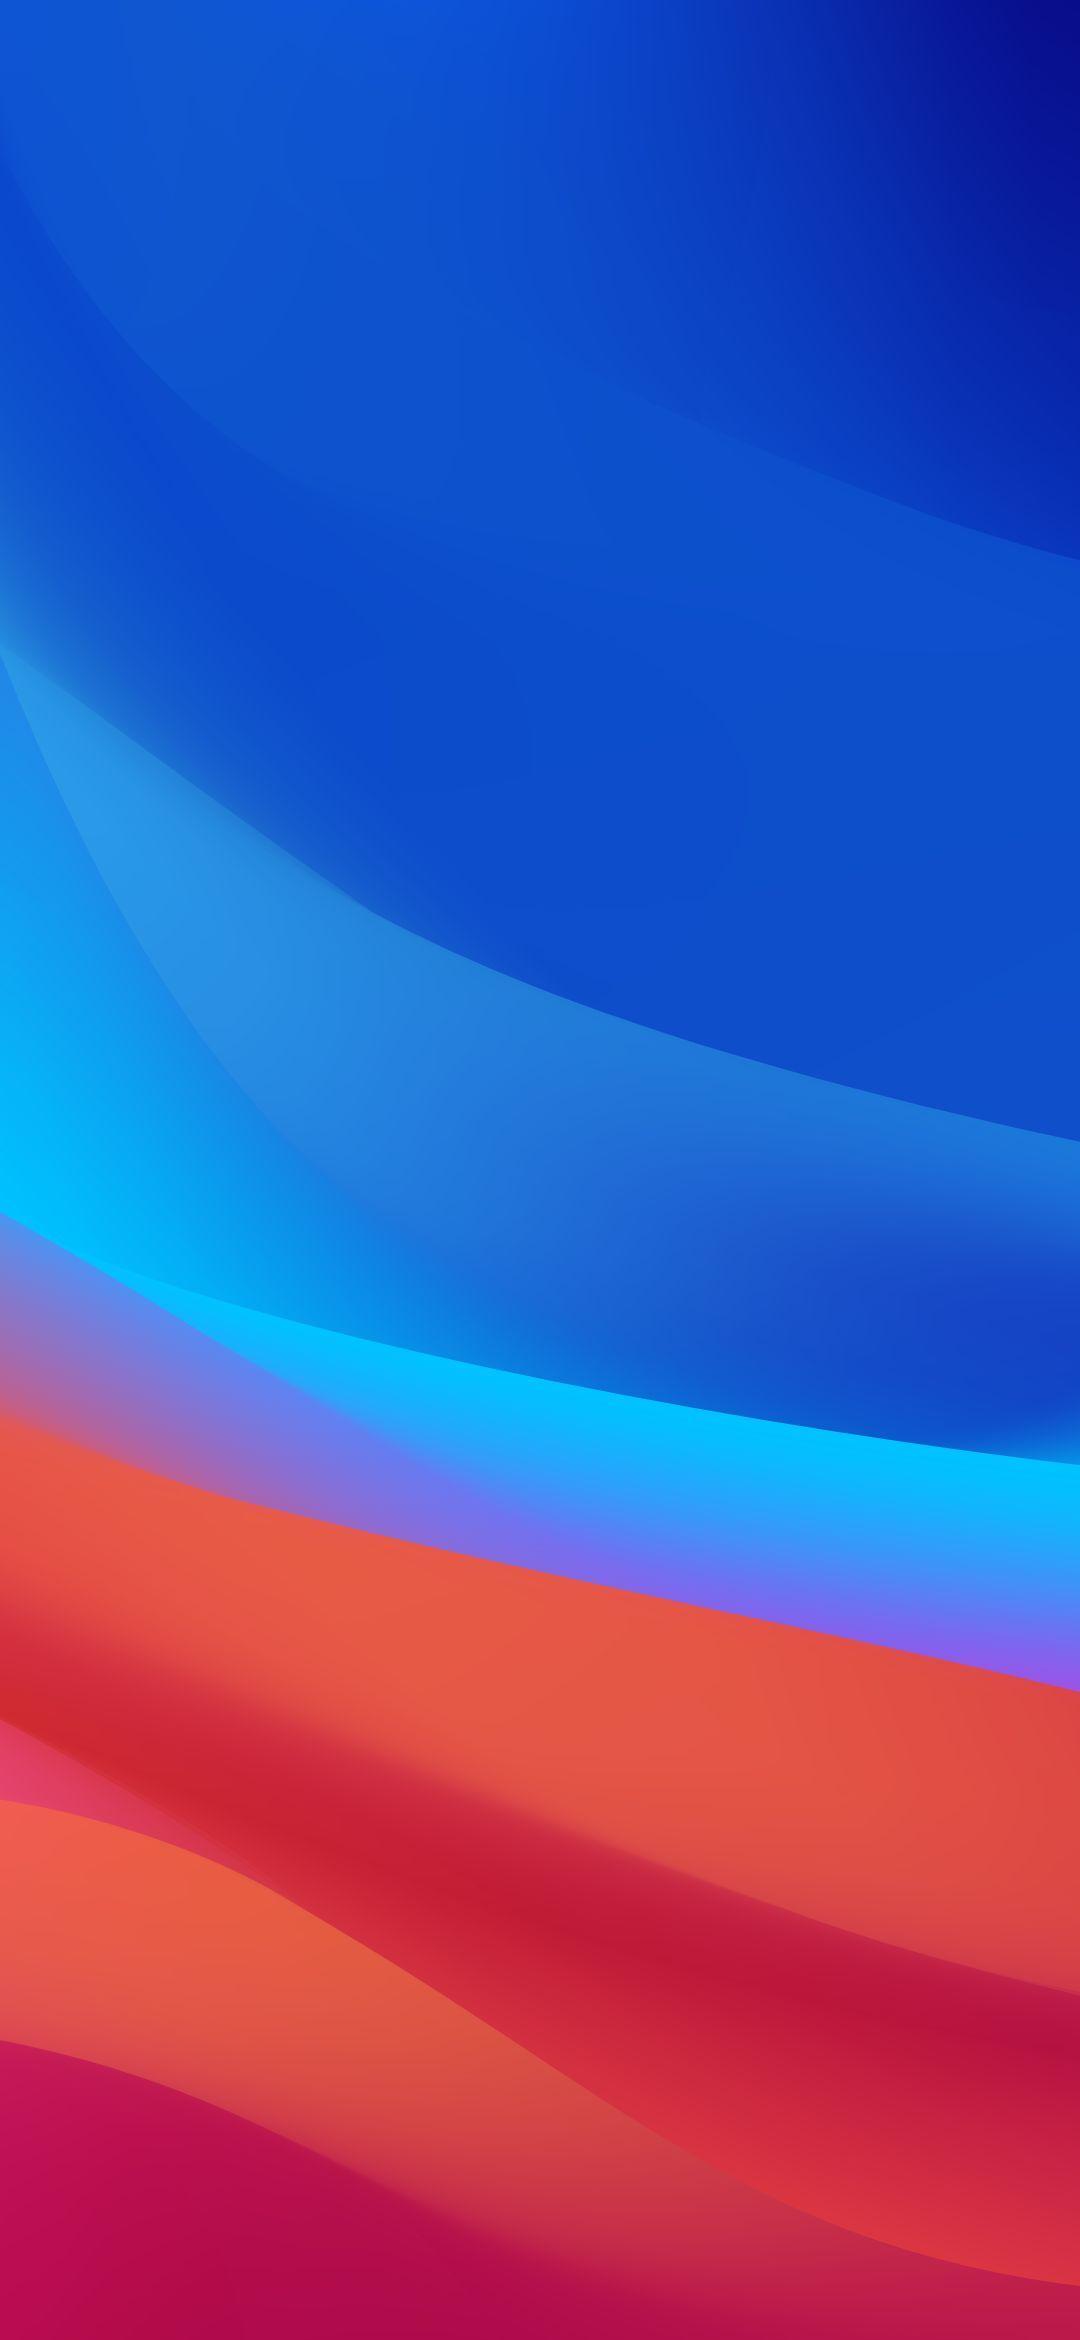 Oppo F9 Pro Stock Wallpapers HD